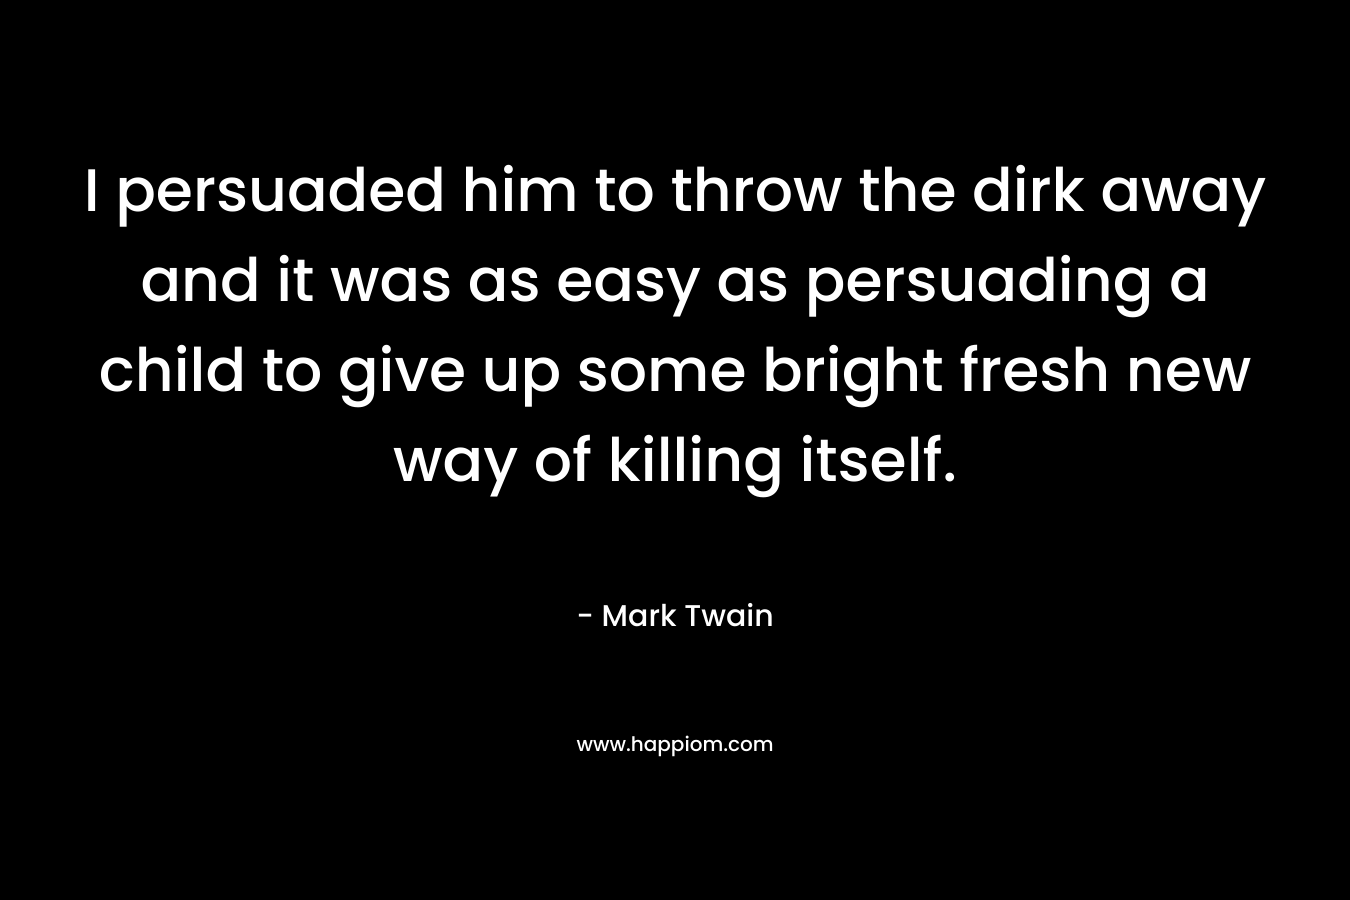 I persuaded him to throw the dirk away and it was as easy as persuading a child to give up some bright fresh new way of killing itself.  – Mark Twain